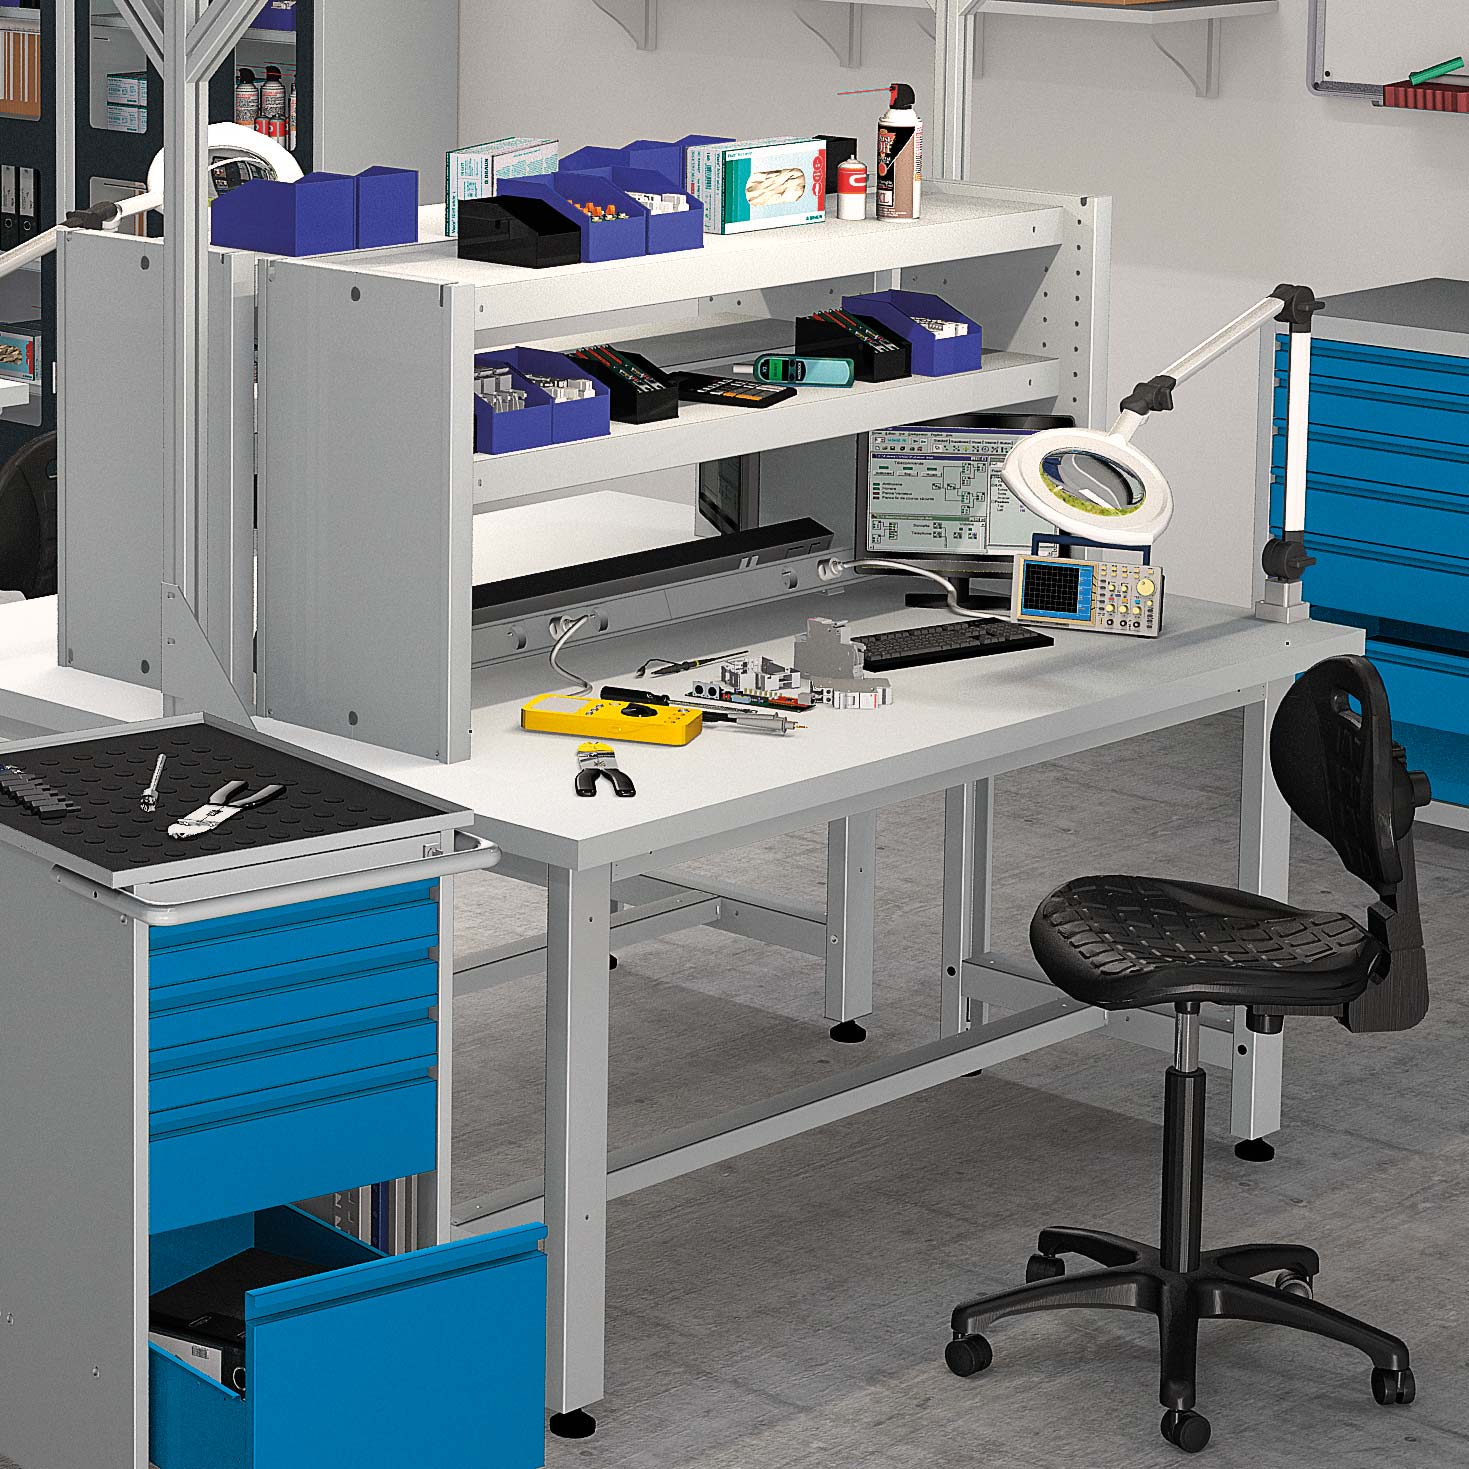 Professional workstations